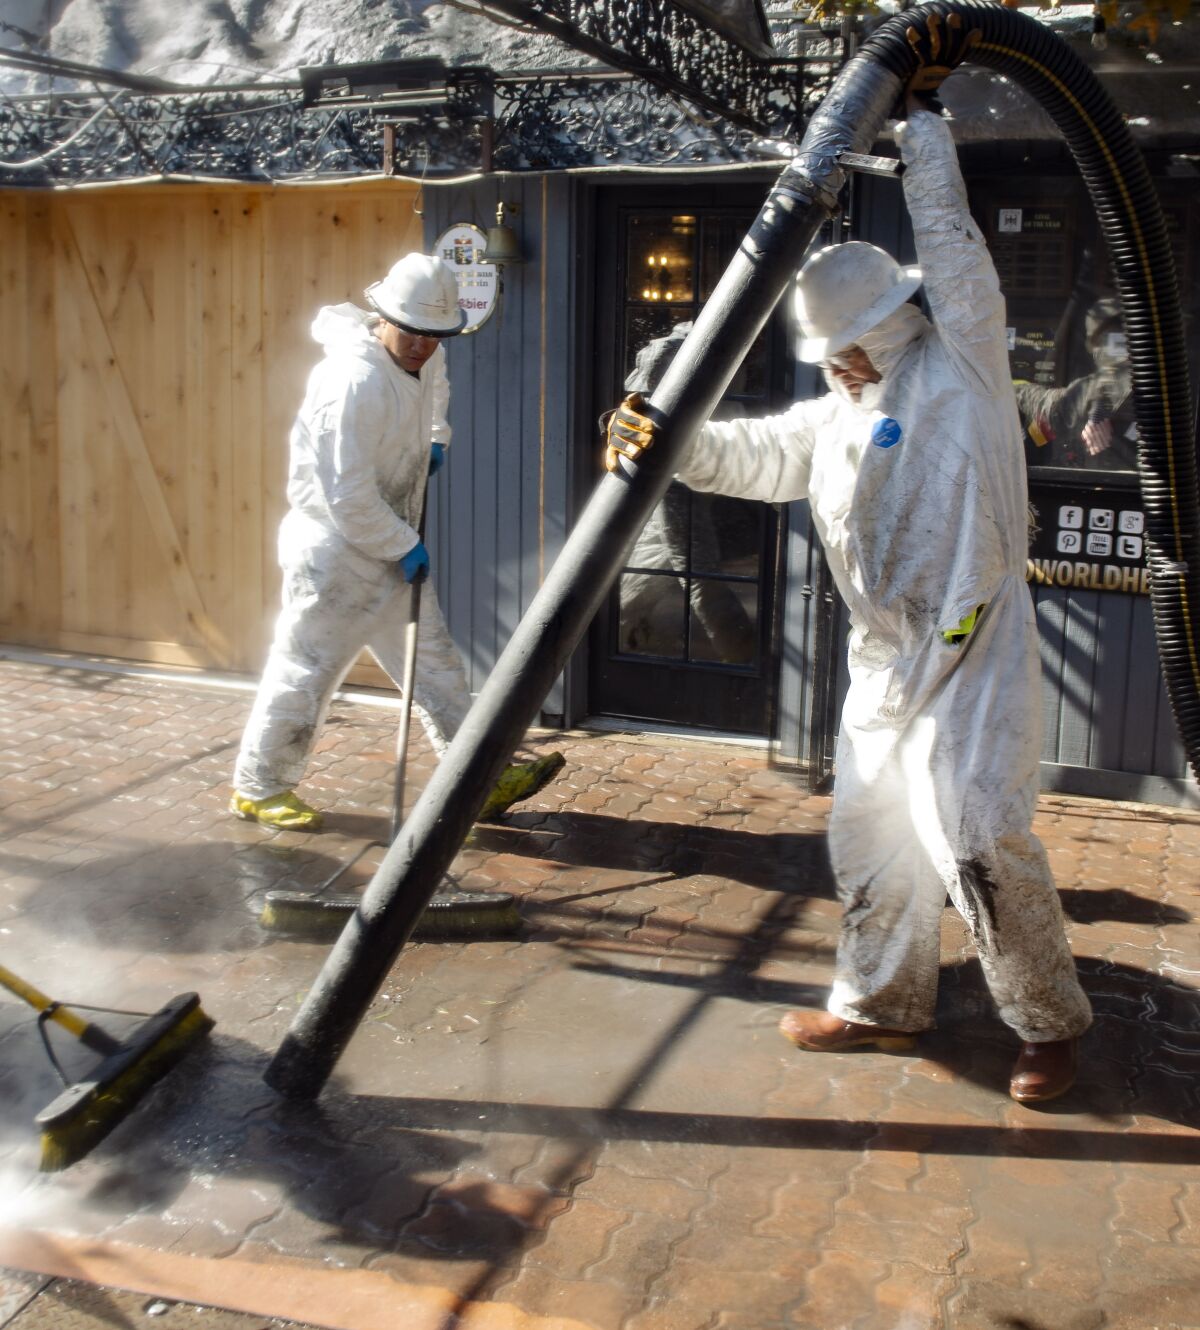 On Sunday, October 6, 2019 contract crews clean up the aftermath of an electrical vault explosion that happened Saturday night Oct. 5, at the Old World Village in Huntington Beach, Calif., during an Oktoberfest celebration. At least five people were injured in the blast. (Mindy Schauer/The Orange County Register via AP)